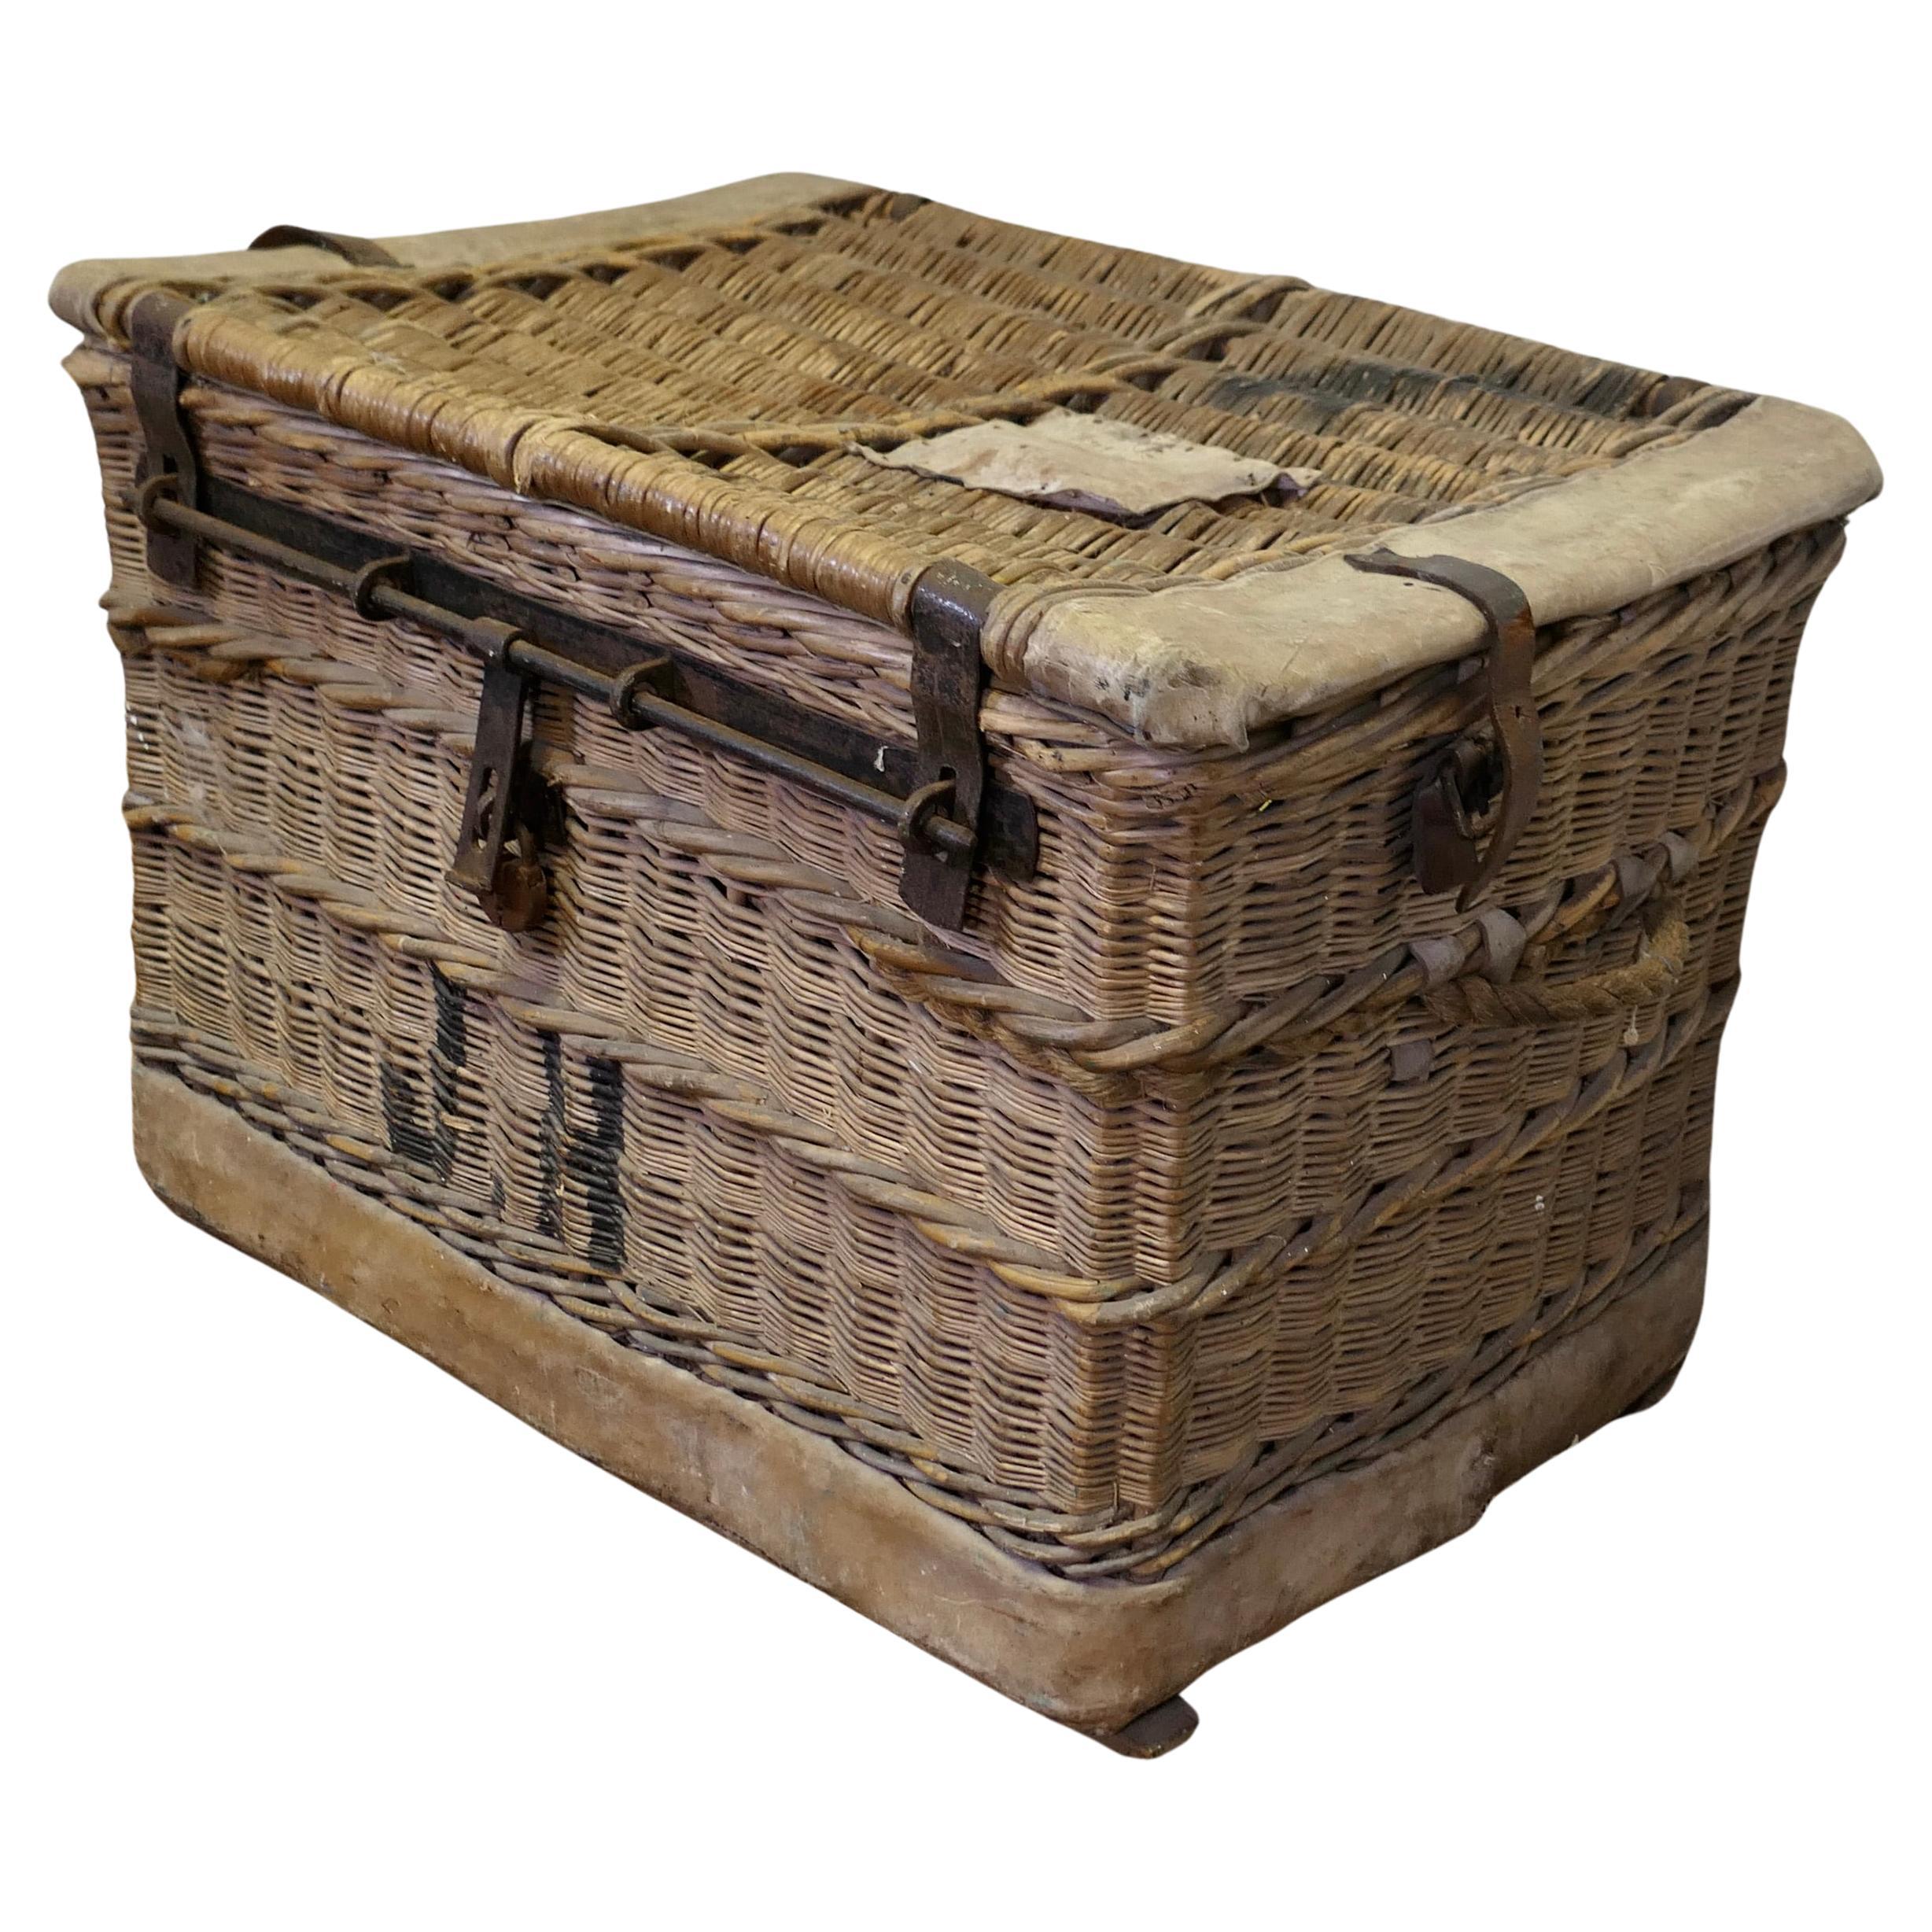 Huge Wicker Railway Parcel Hamper Very strong and attractive piece For Sale